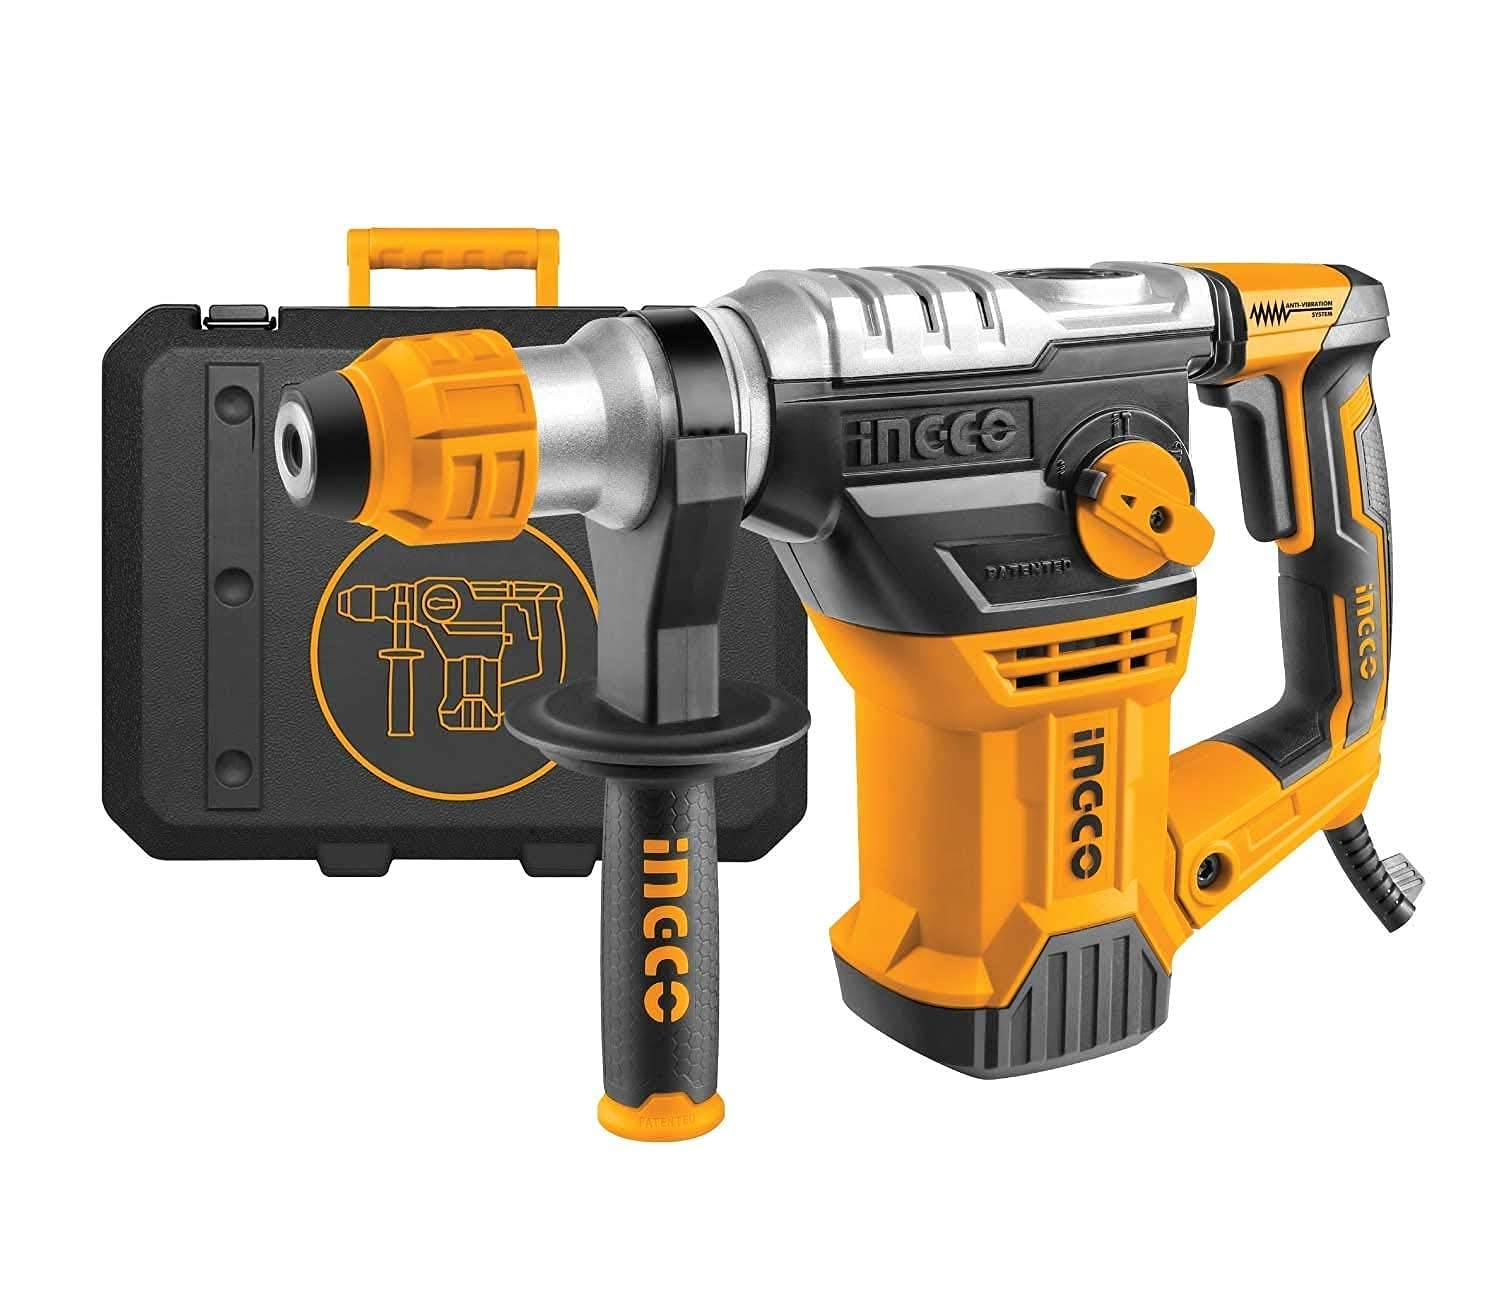 Ingco Innovative Industrial 1500W Rotary Hammer Cum Breaker Cum Demolition Hammer | 3 drills, 2 chisels Corded-electric, 220-240V - Yellow Rotary Hammers